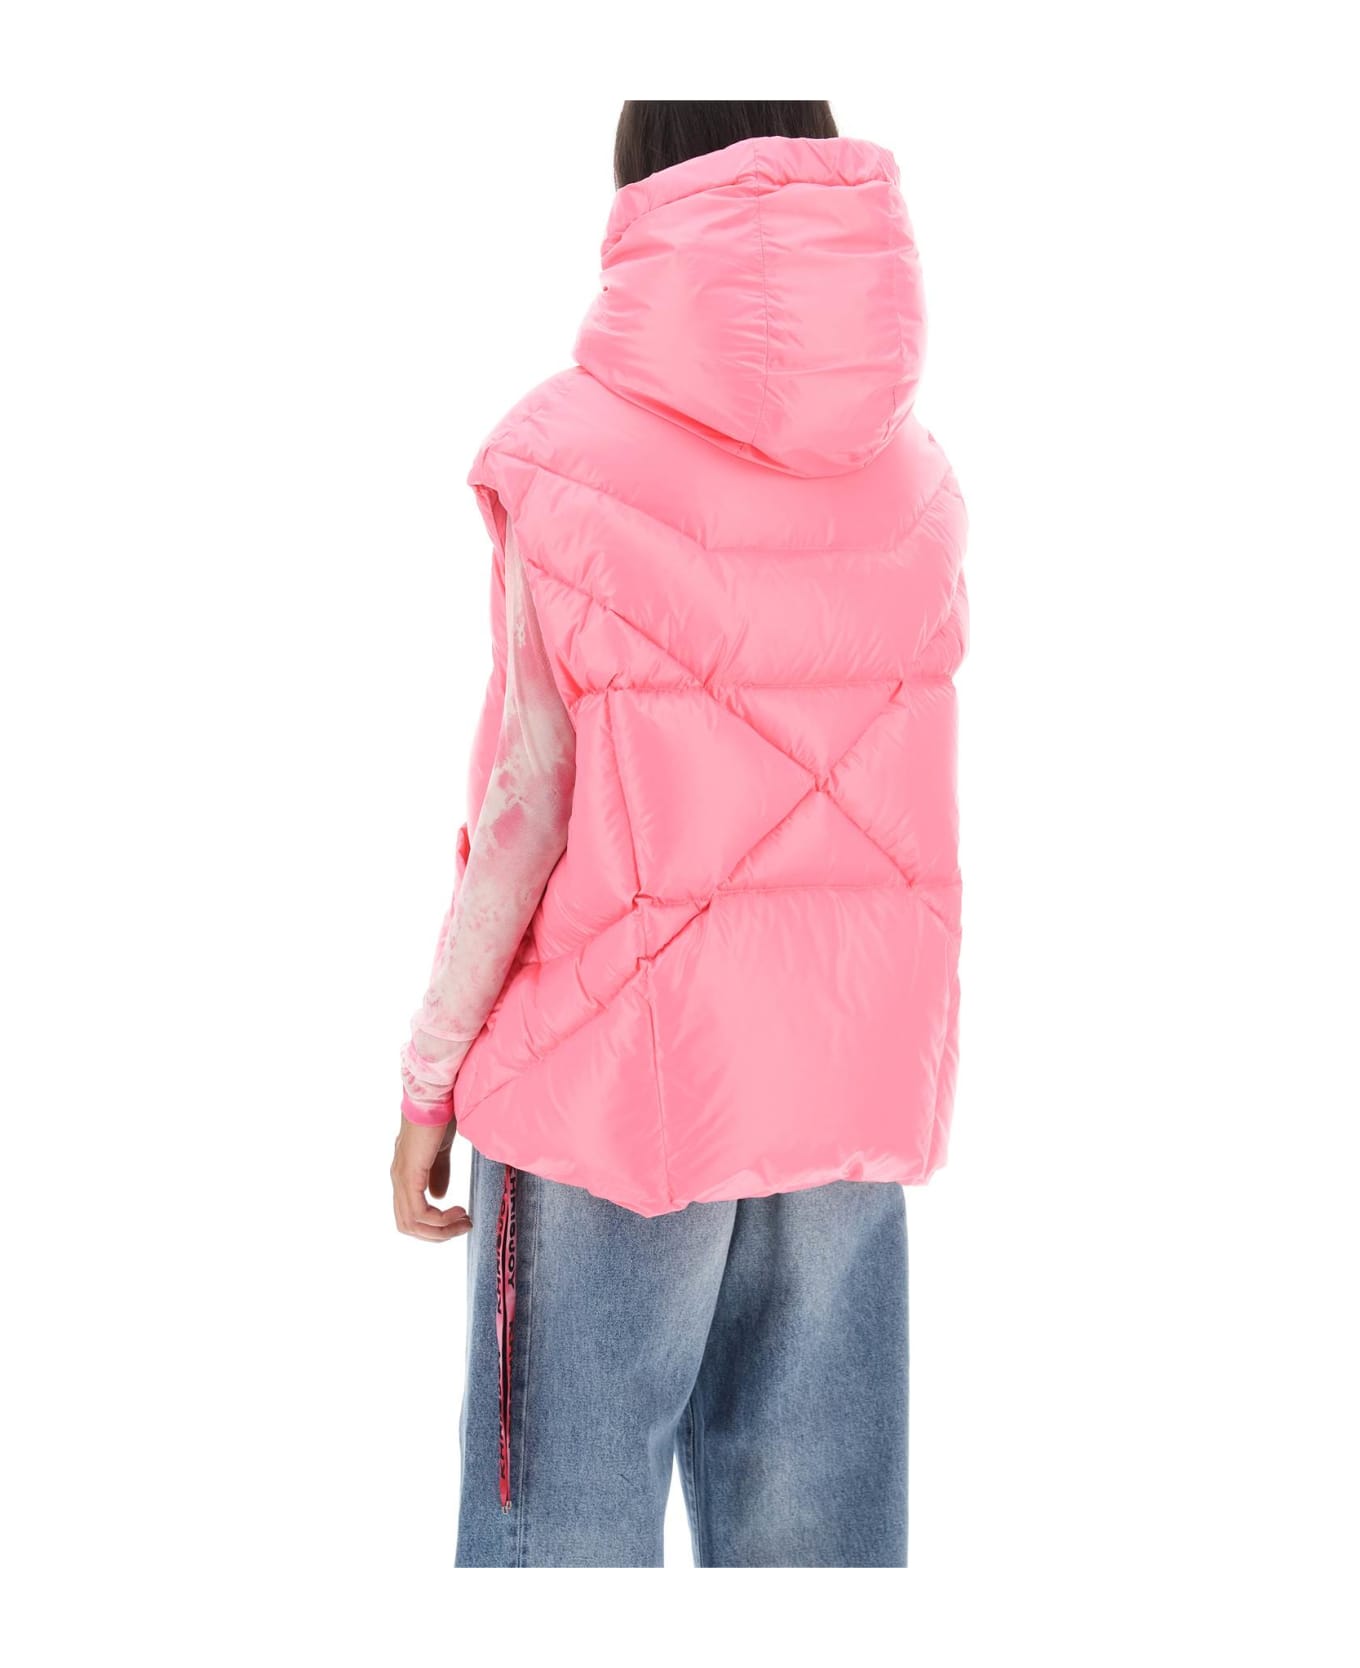 Khrisjoy Oversized Puffer Vest With Hood - FLAMINGO PINK (Pink)